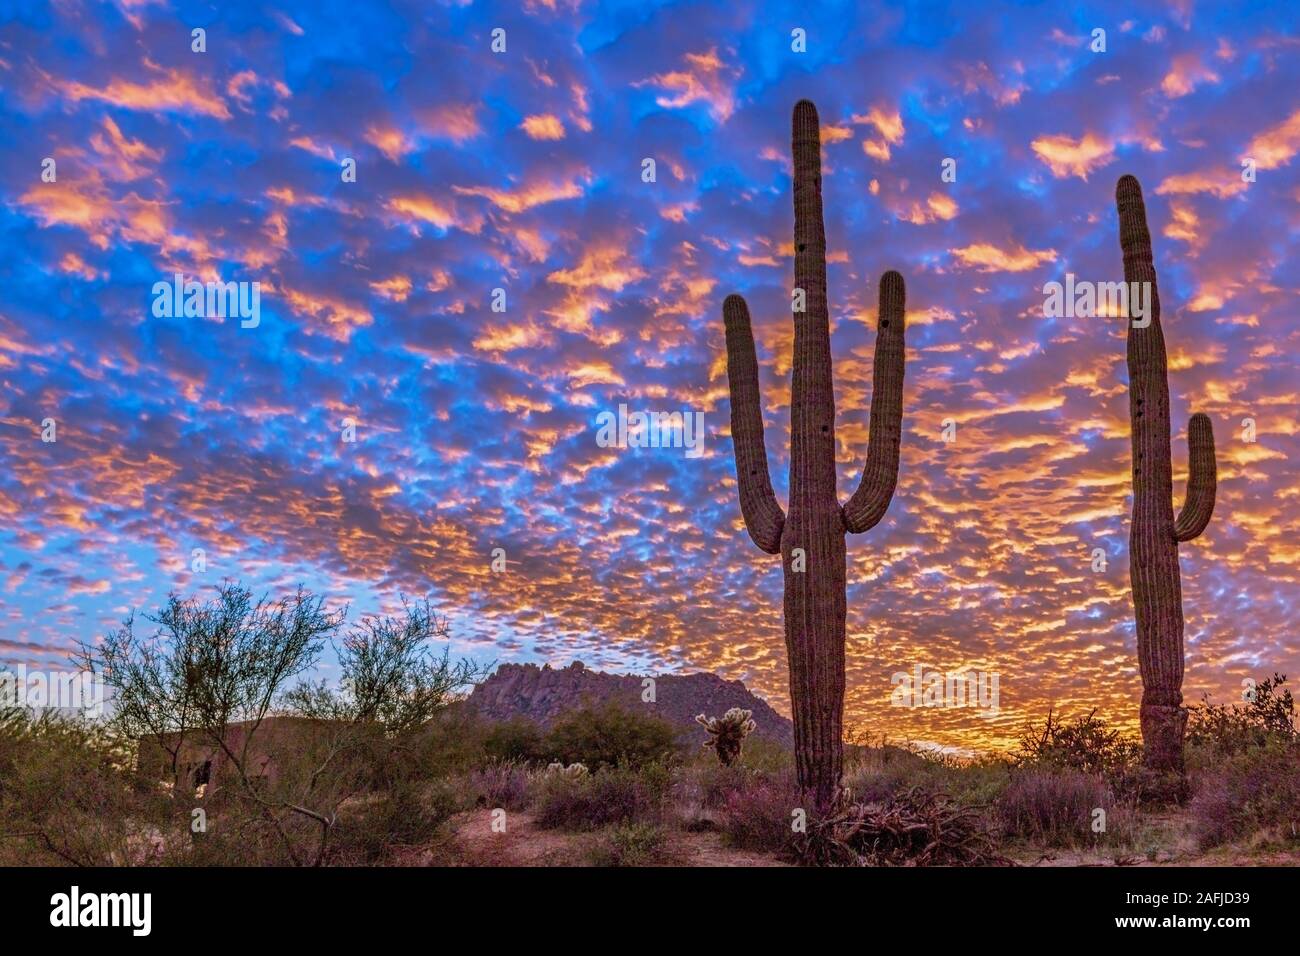 Colorful and epic Arizona Sunset Landscape With Cactus in Foreground Near Scottsdale. Stock Photo